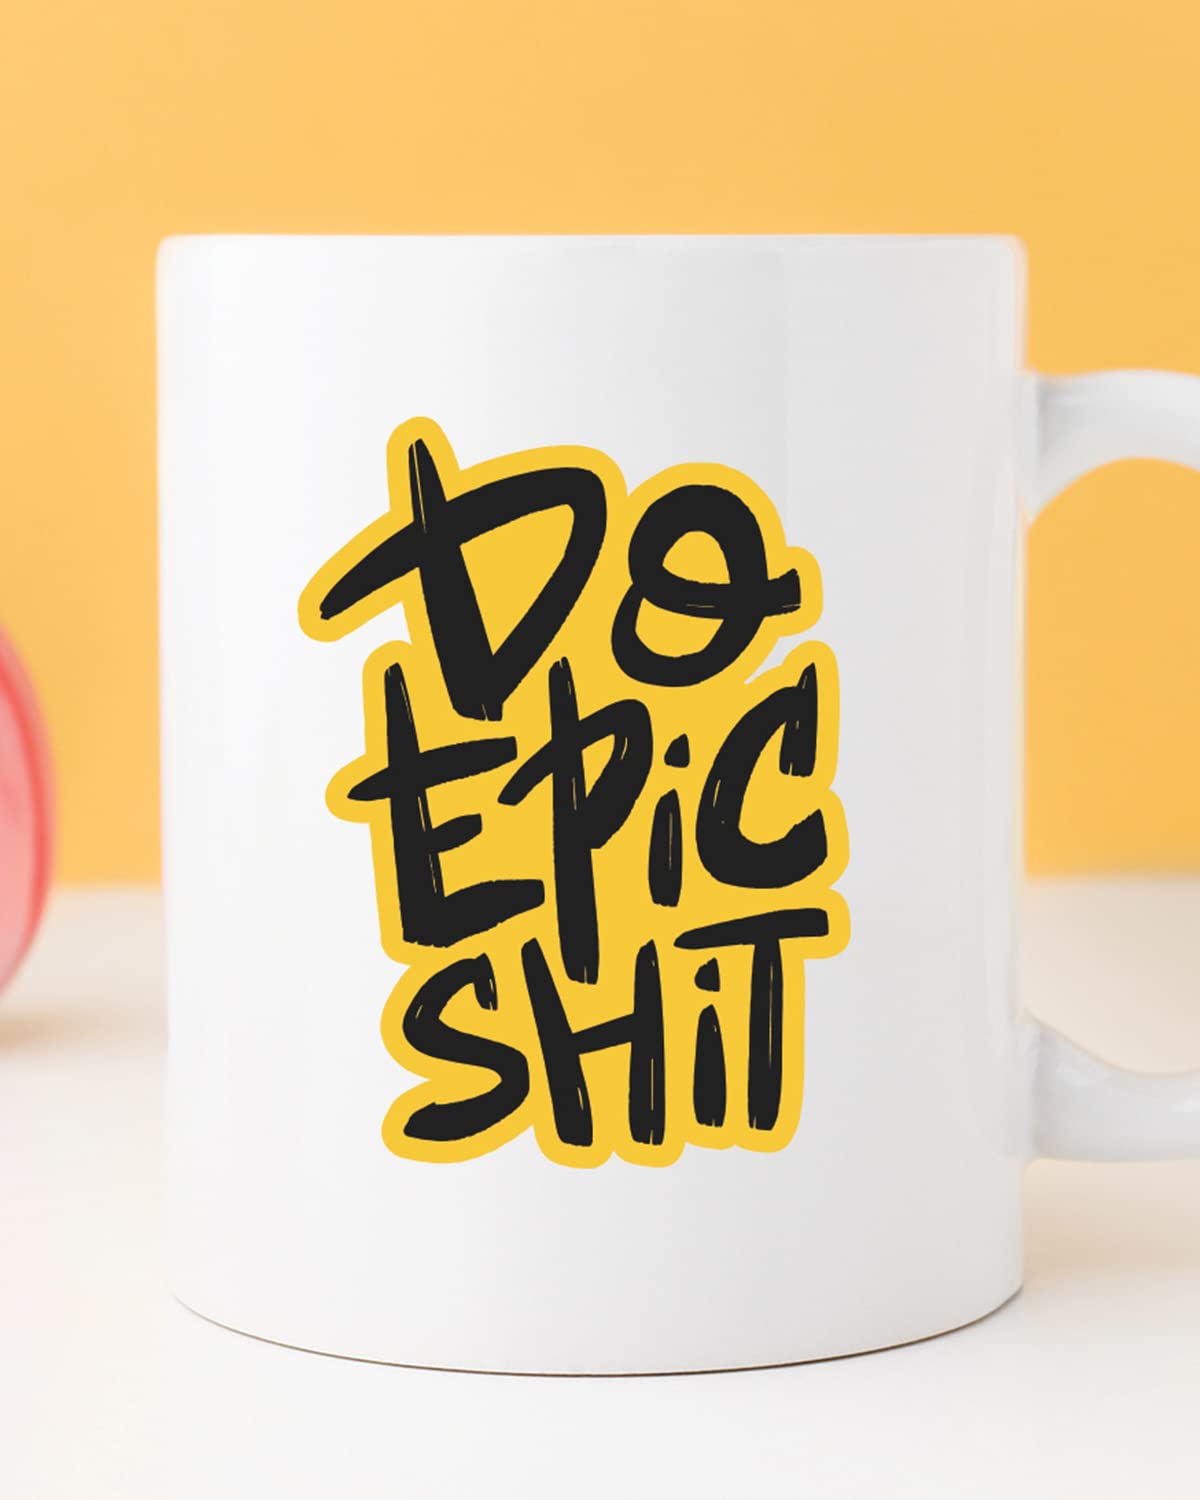 DO Epic Shit Coffee Mug - Birthday Gift, Motivational Mug, Printed with Inspiring Quotes, Positivity Mug, Inspirational Gift for Him & Her, Best Friend Gift, Gifts for Her, Cheer Up Gift